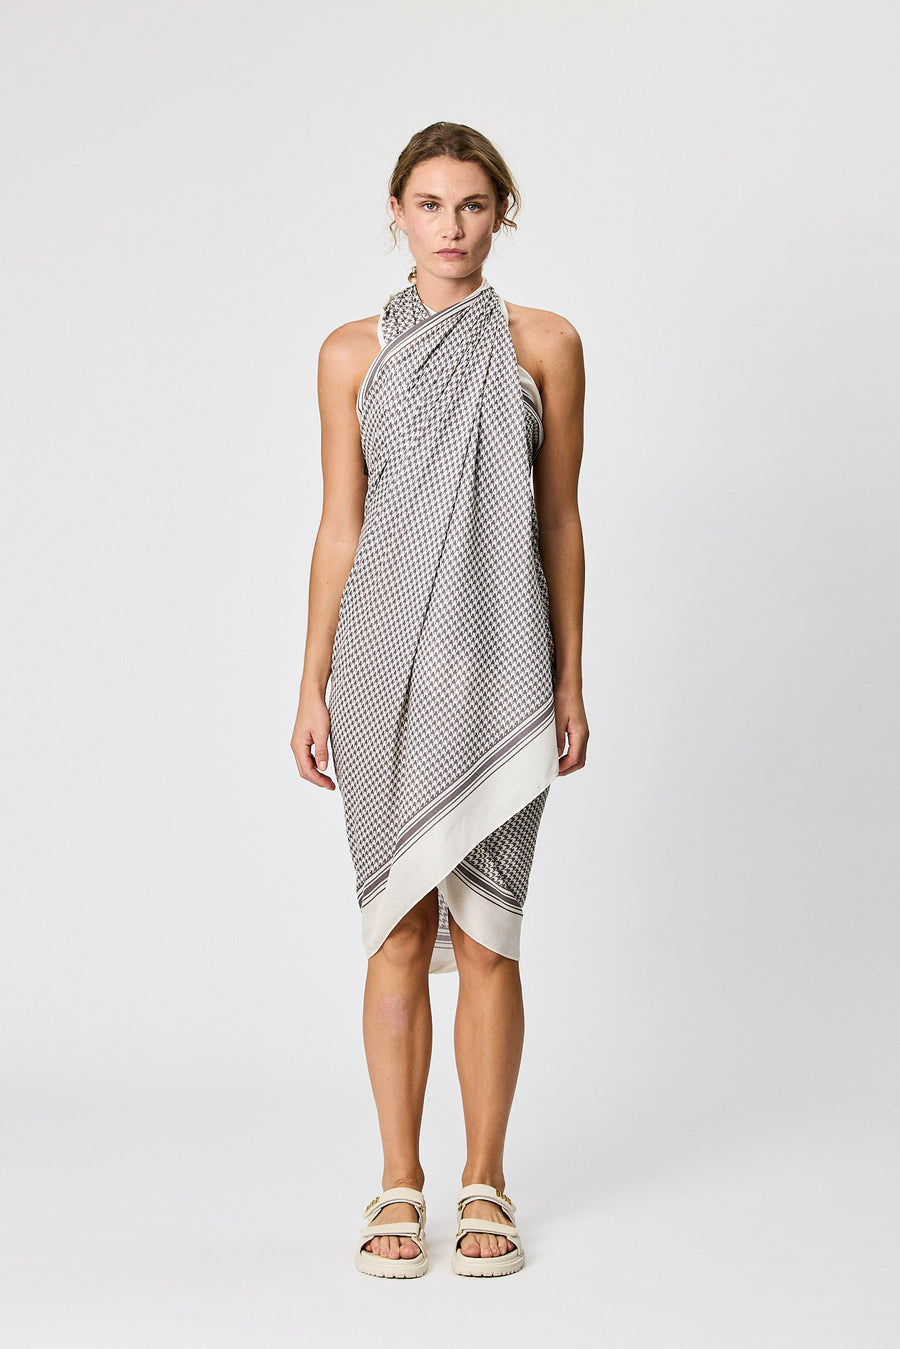 ELLIE LARGE SARONG - CHARCOAL HOUNDSTOOTH